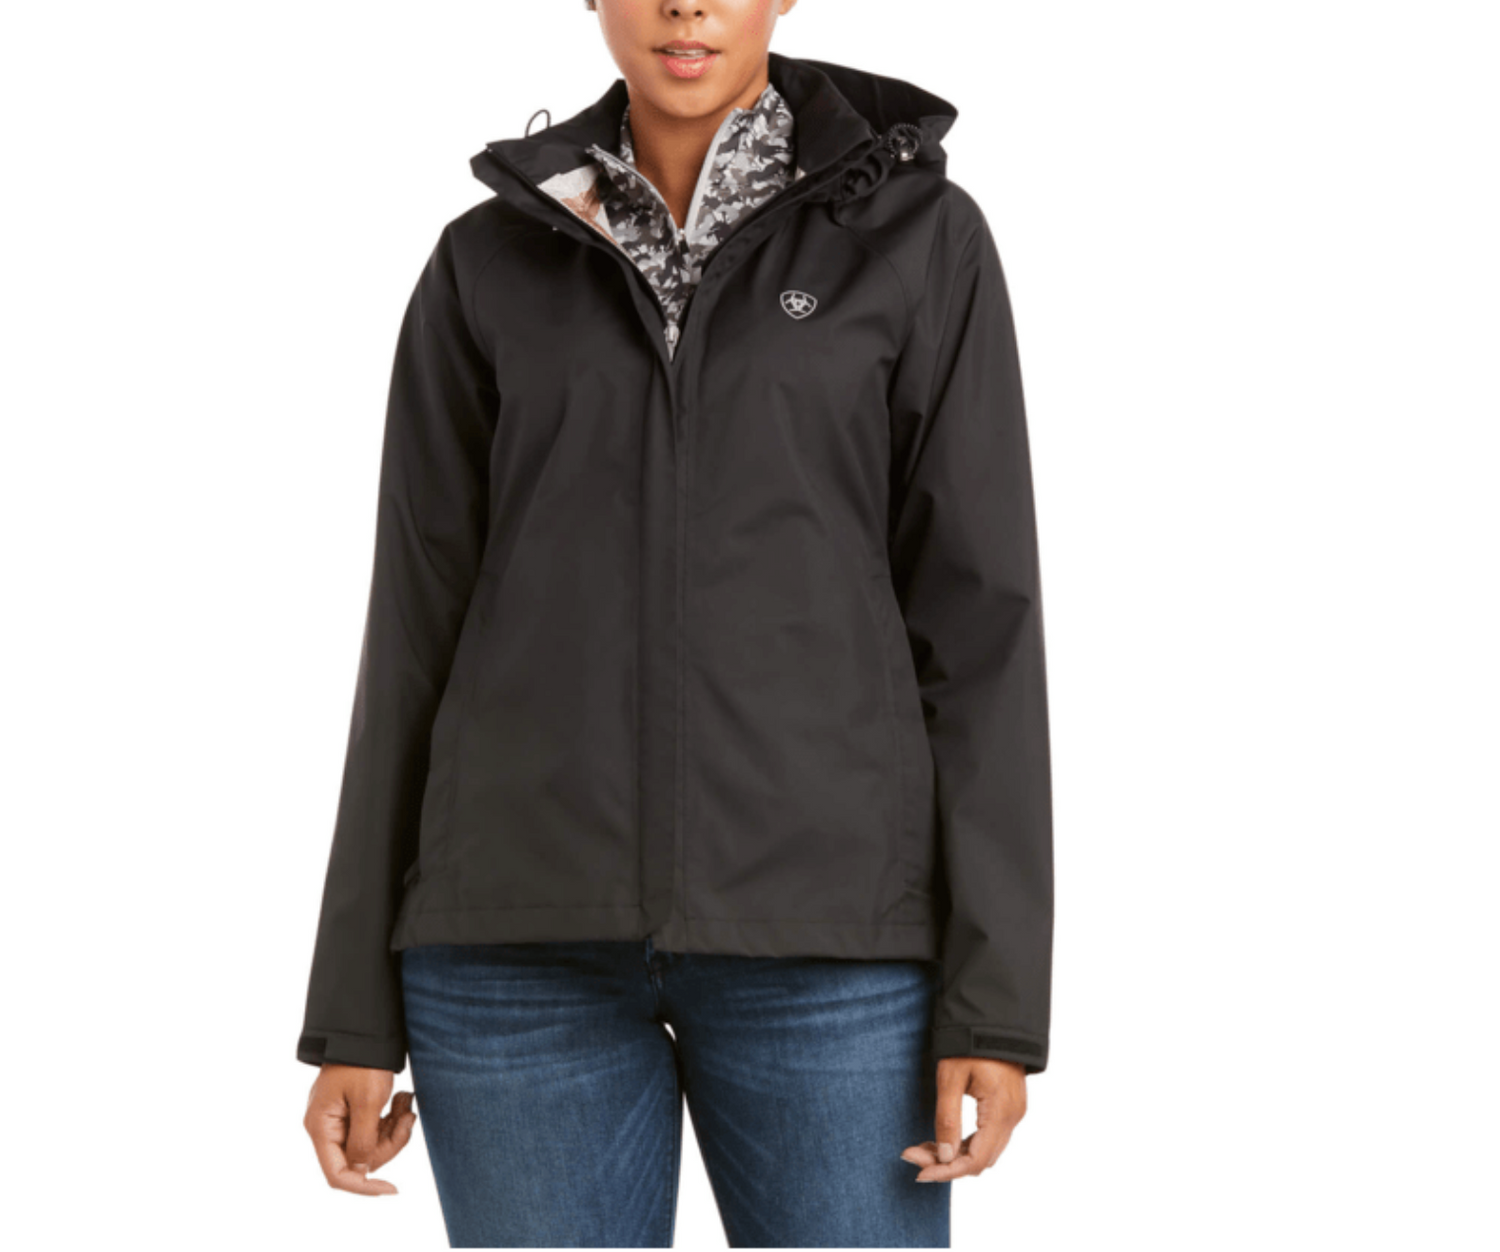 Ariat Womens Packable H2O Jacket